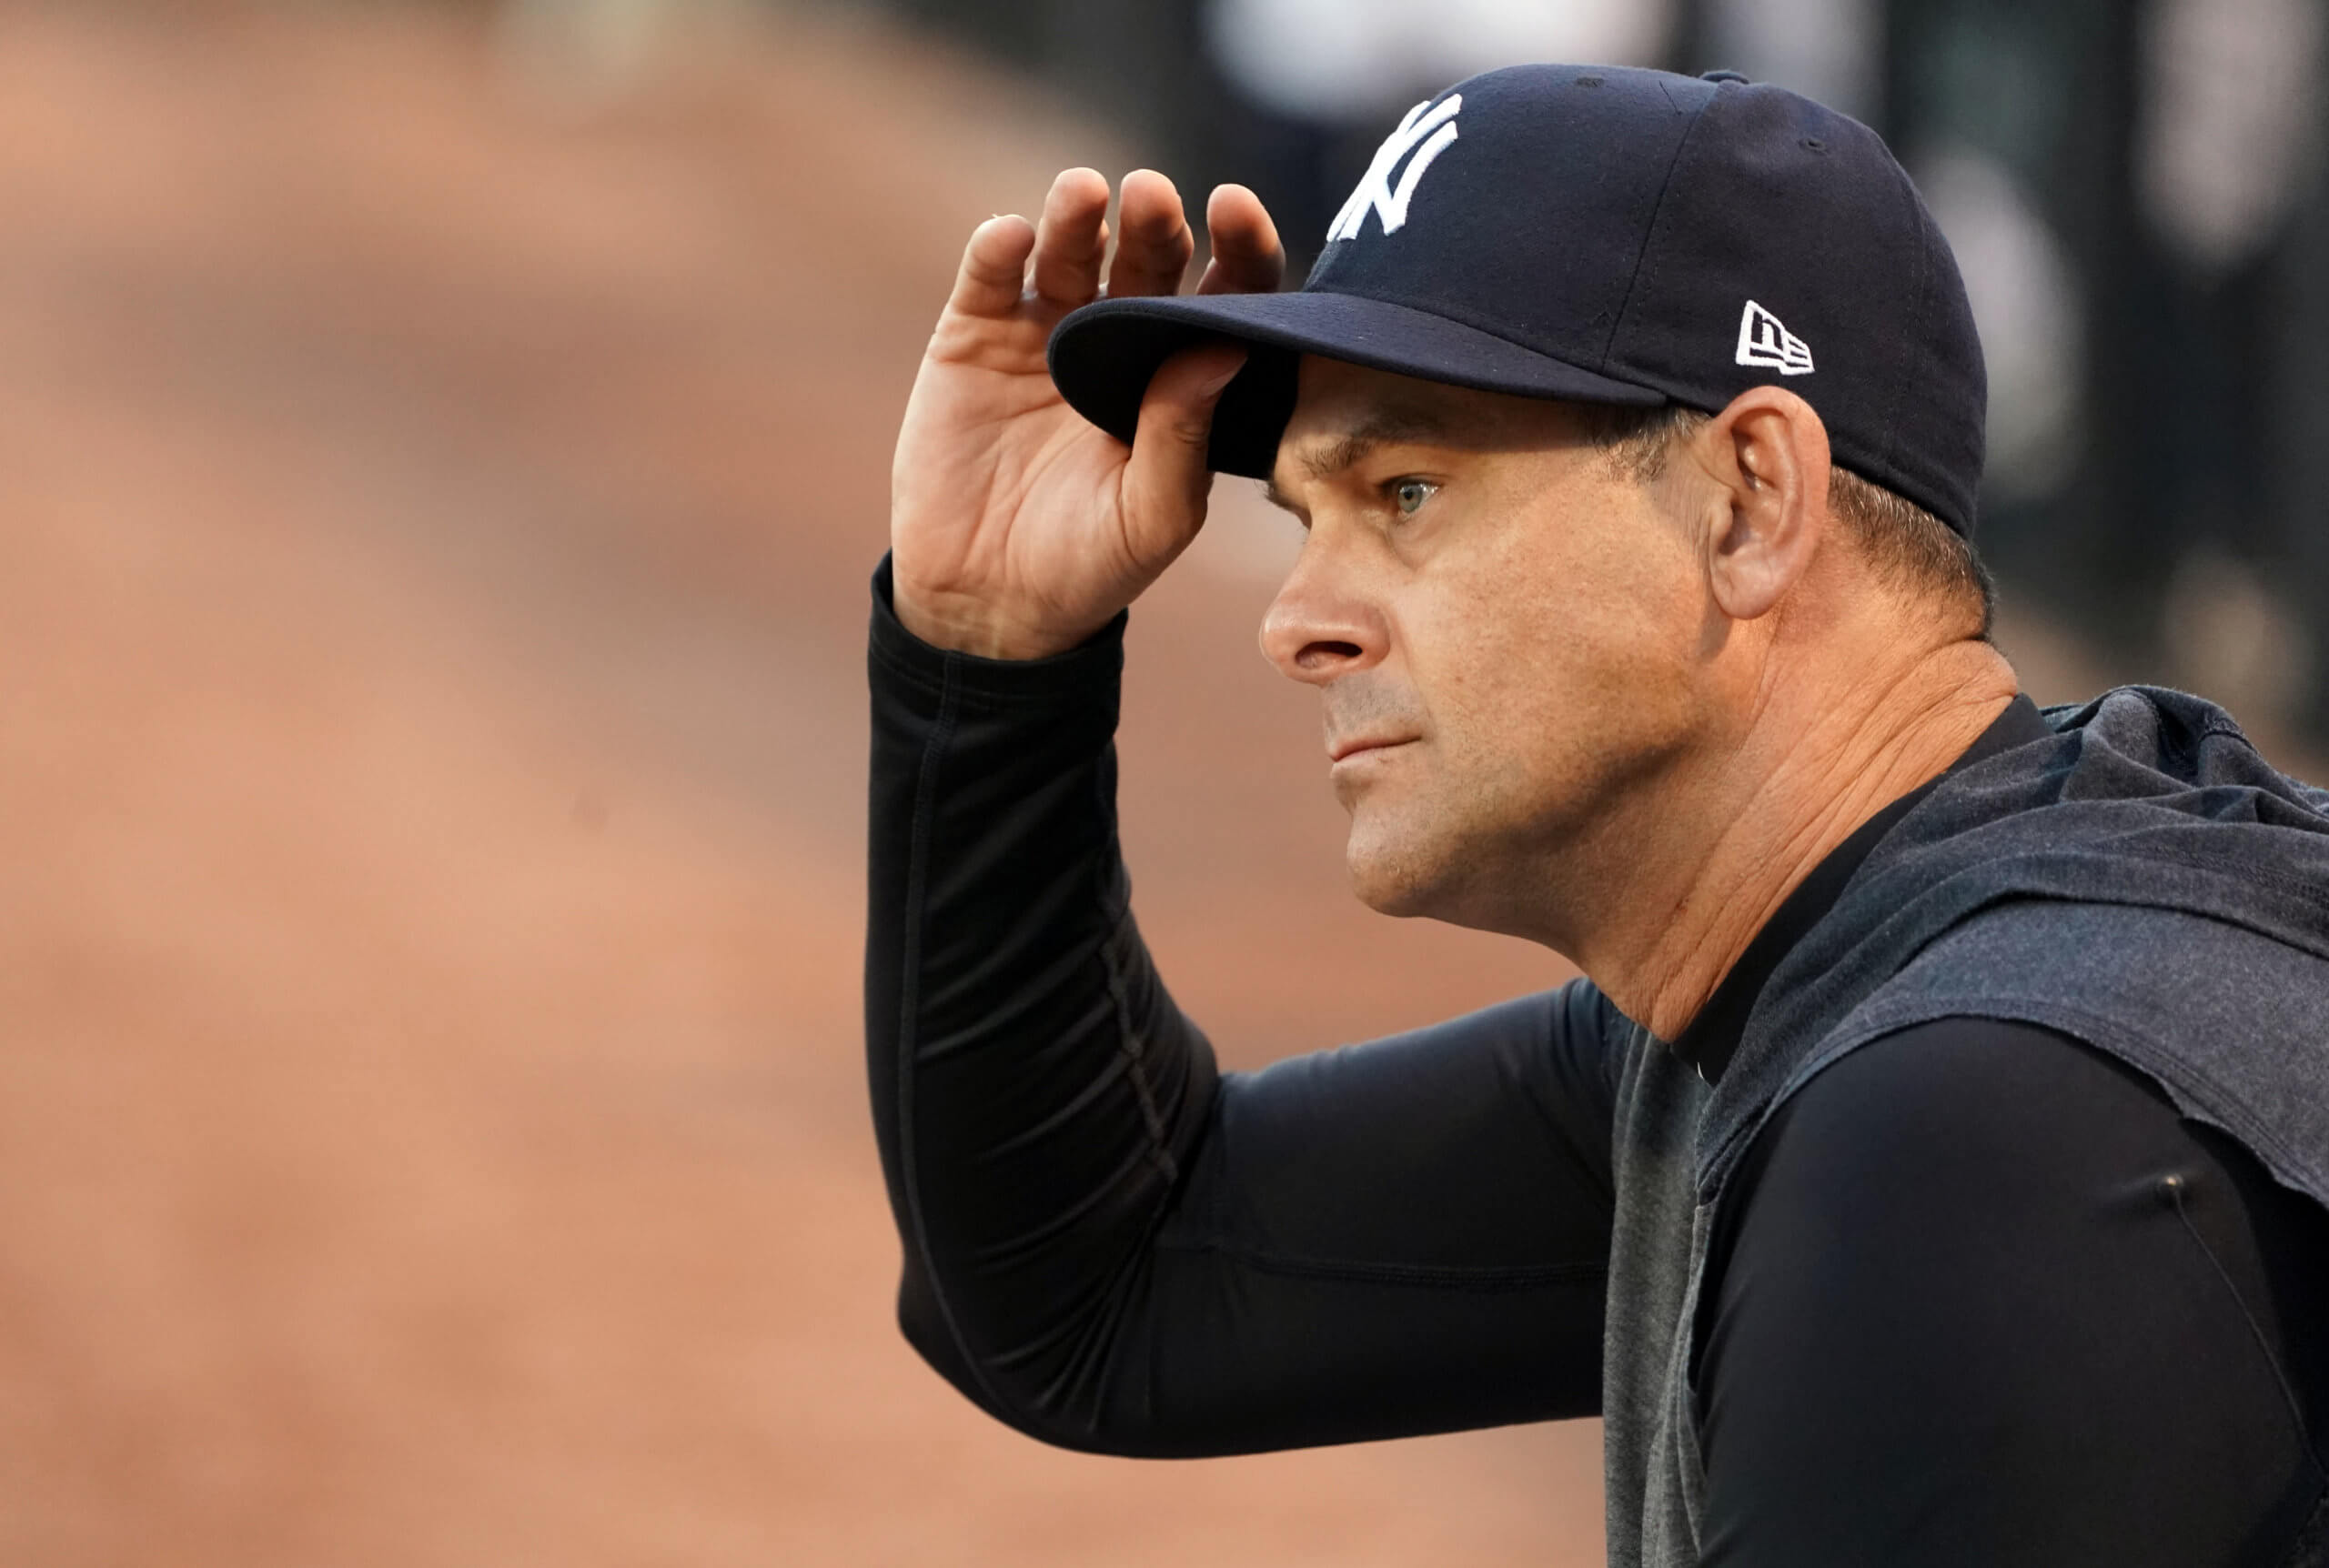 Yankees manager Aaron Boone holiday Q&A